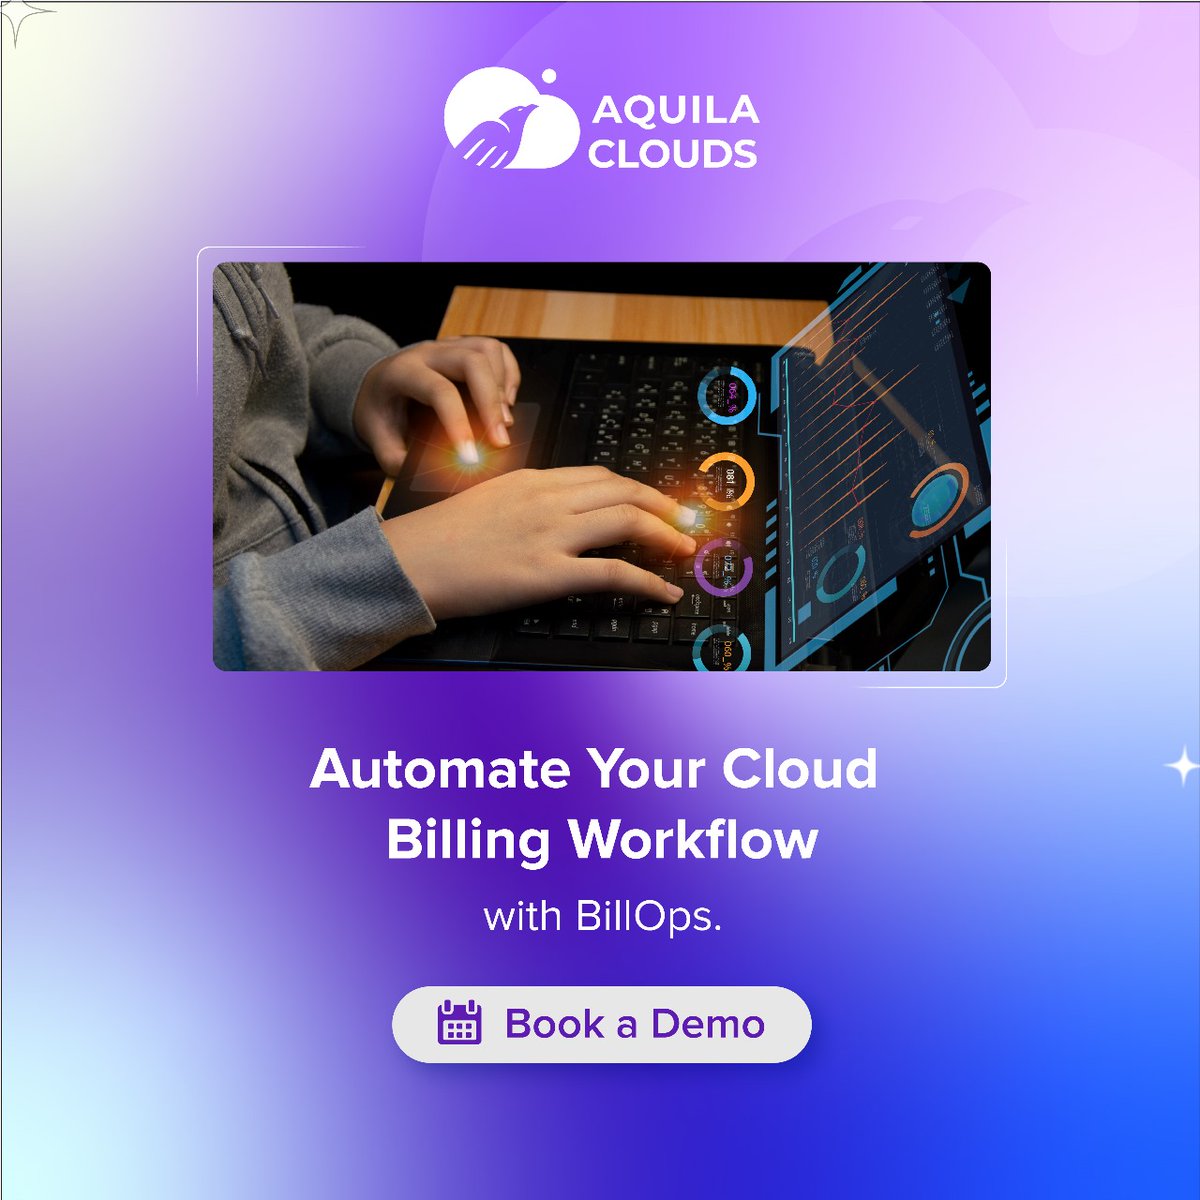 **Drowning in a sea of cloud bills? ** Aquila Clouds BillOps automates data for MSPs & Resellers. Stop the manual entry madness! Request your demo today! 

Request a Demo: lnkd.in/djHkrpv

#BillOps #CloudBilling #Automation